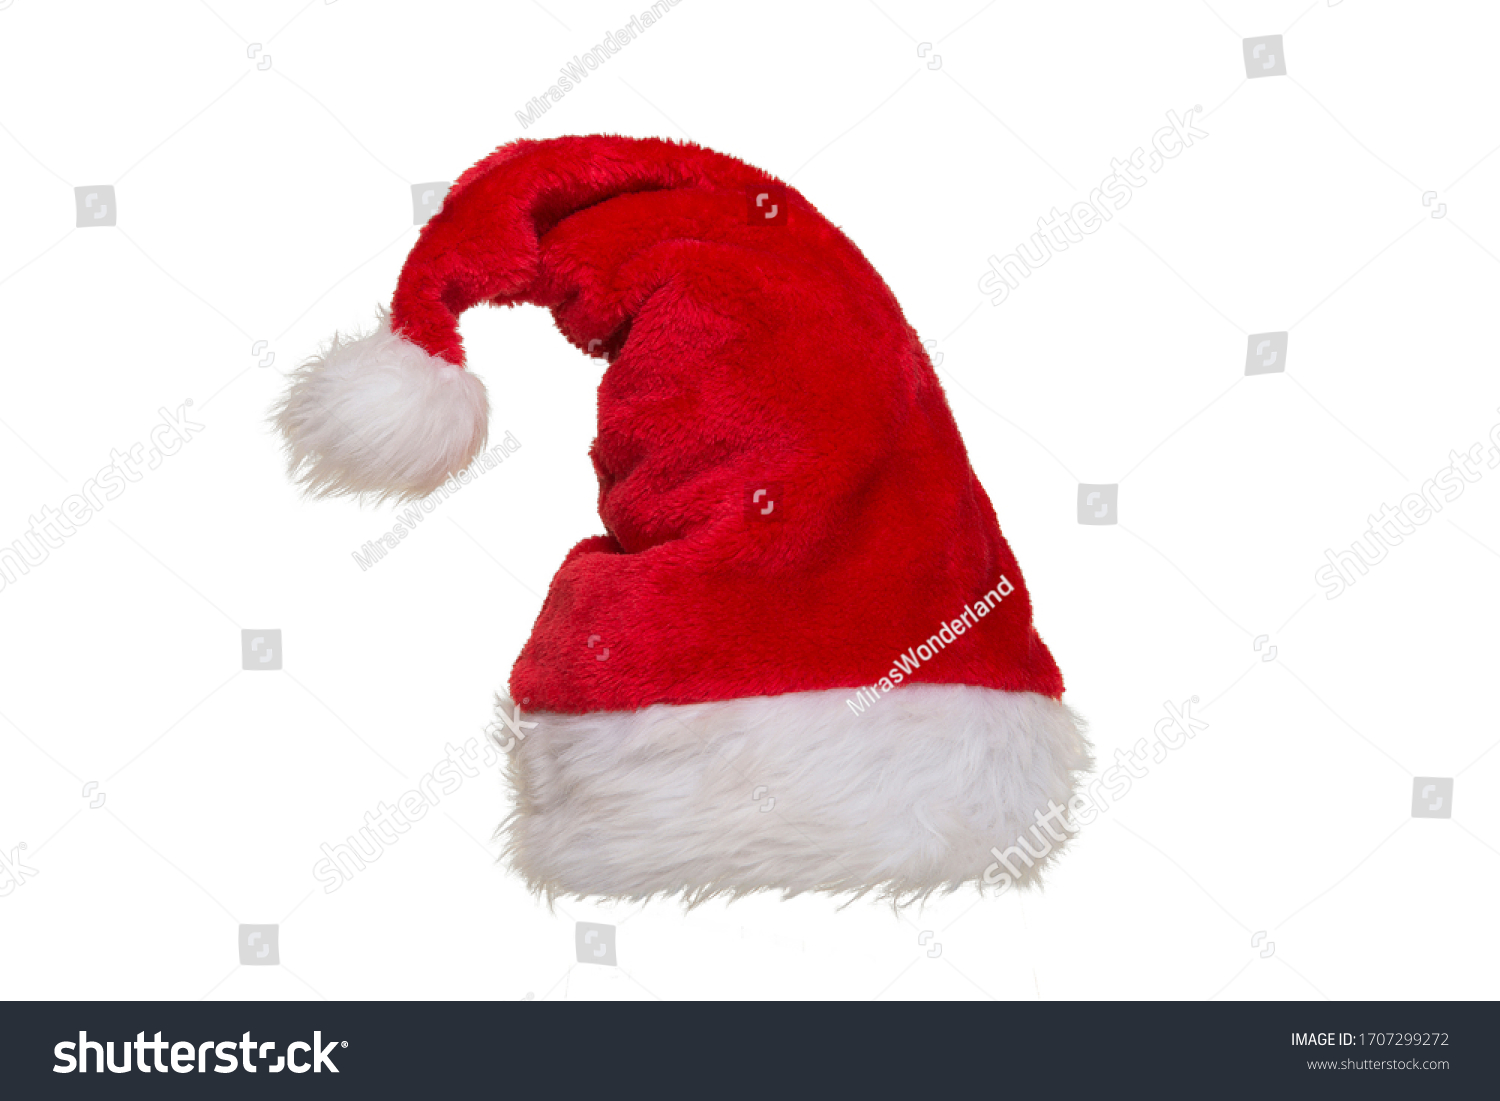 Red and white hat of santa claus isolated on a white background #1707299272